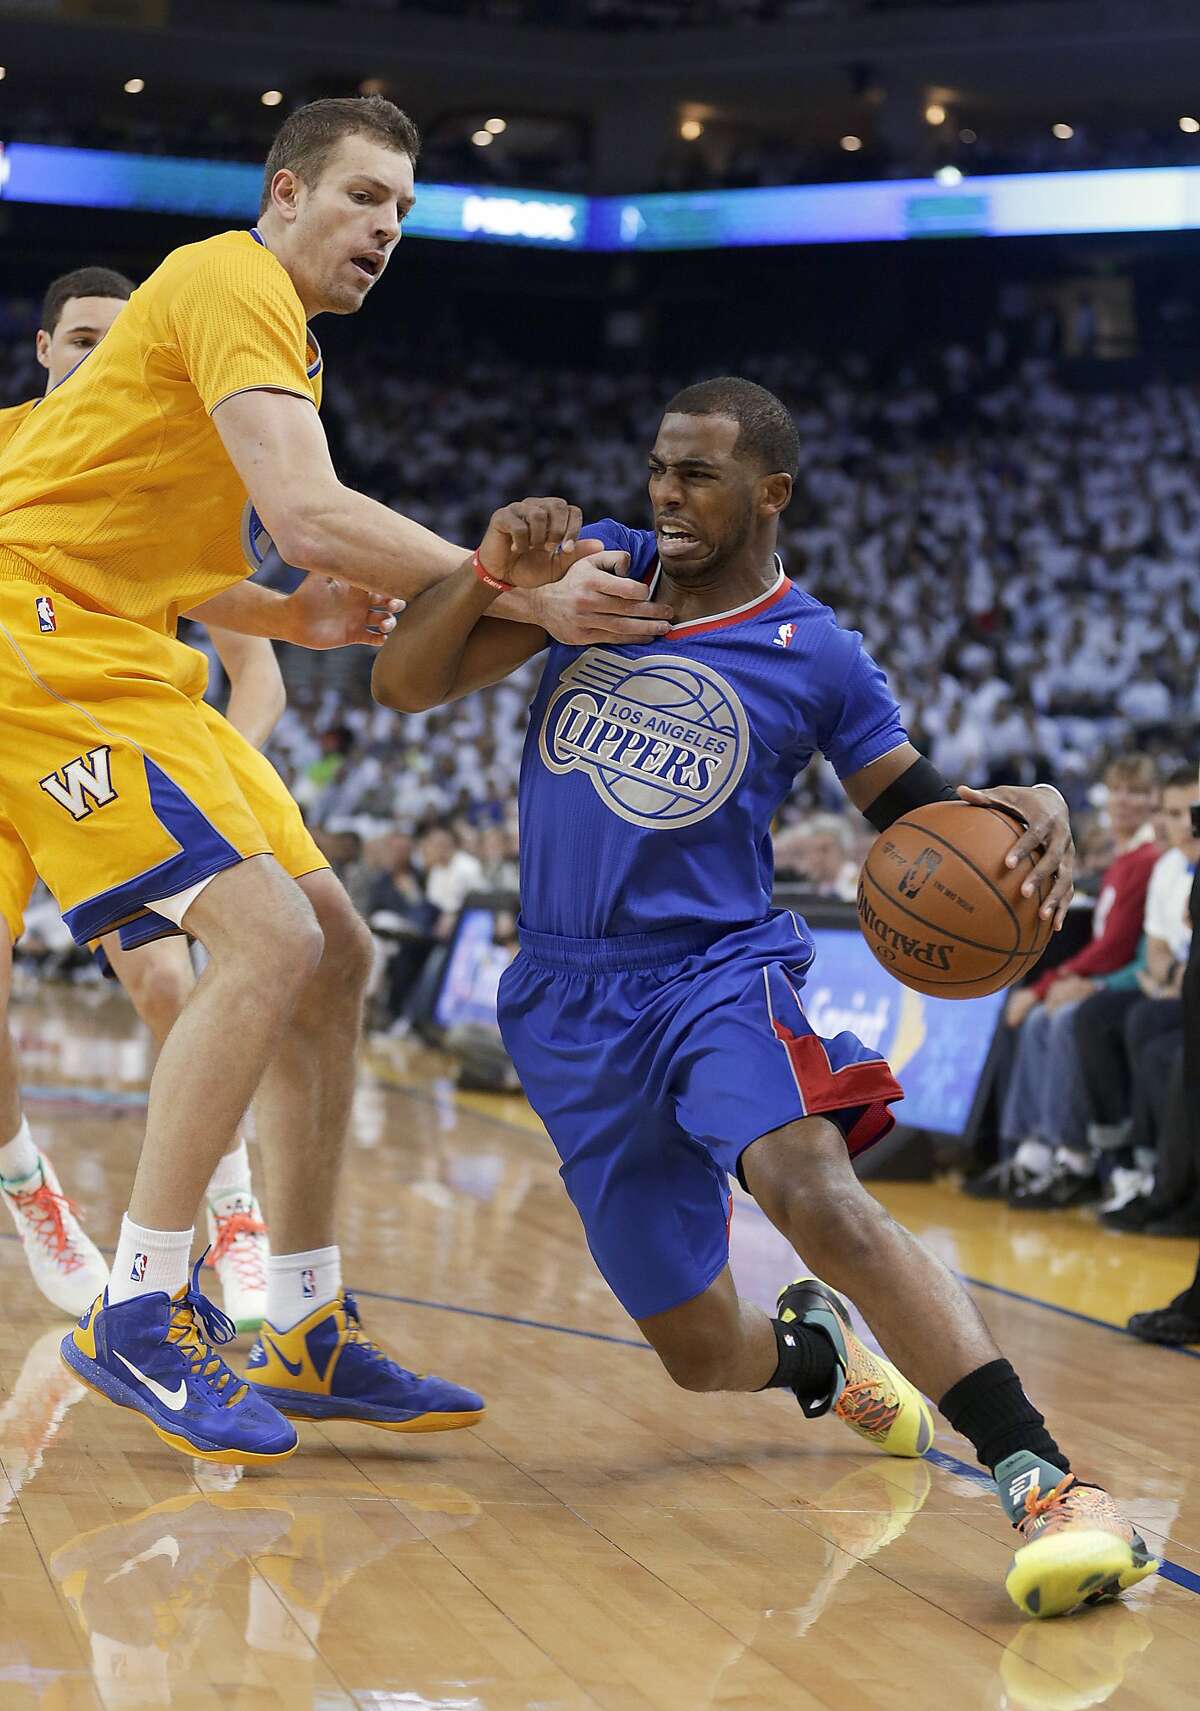 Los Angeles Clippers guard Chris Paul tries to get around Golden State Warriors forward David Lee during the first half of an NBA basketball game, Wednesday, Dec. 25, 2013, in Oakland, Calif. (AP Photo/Tony Avelar)